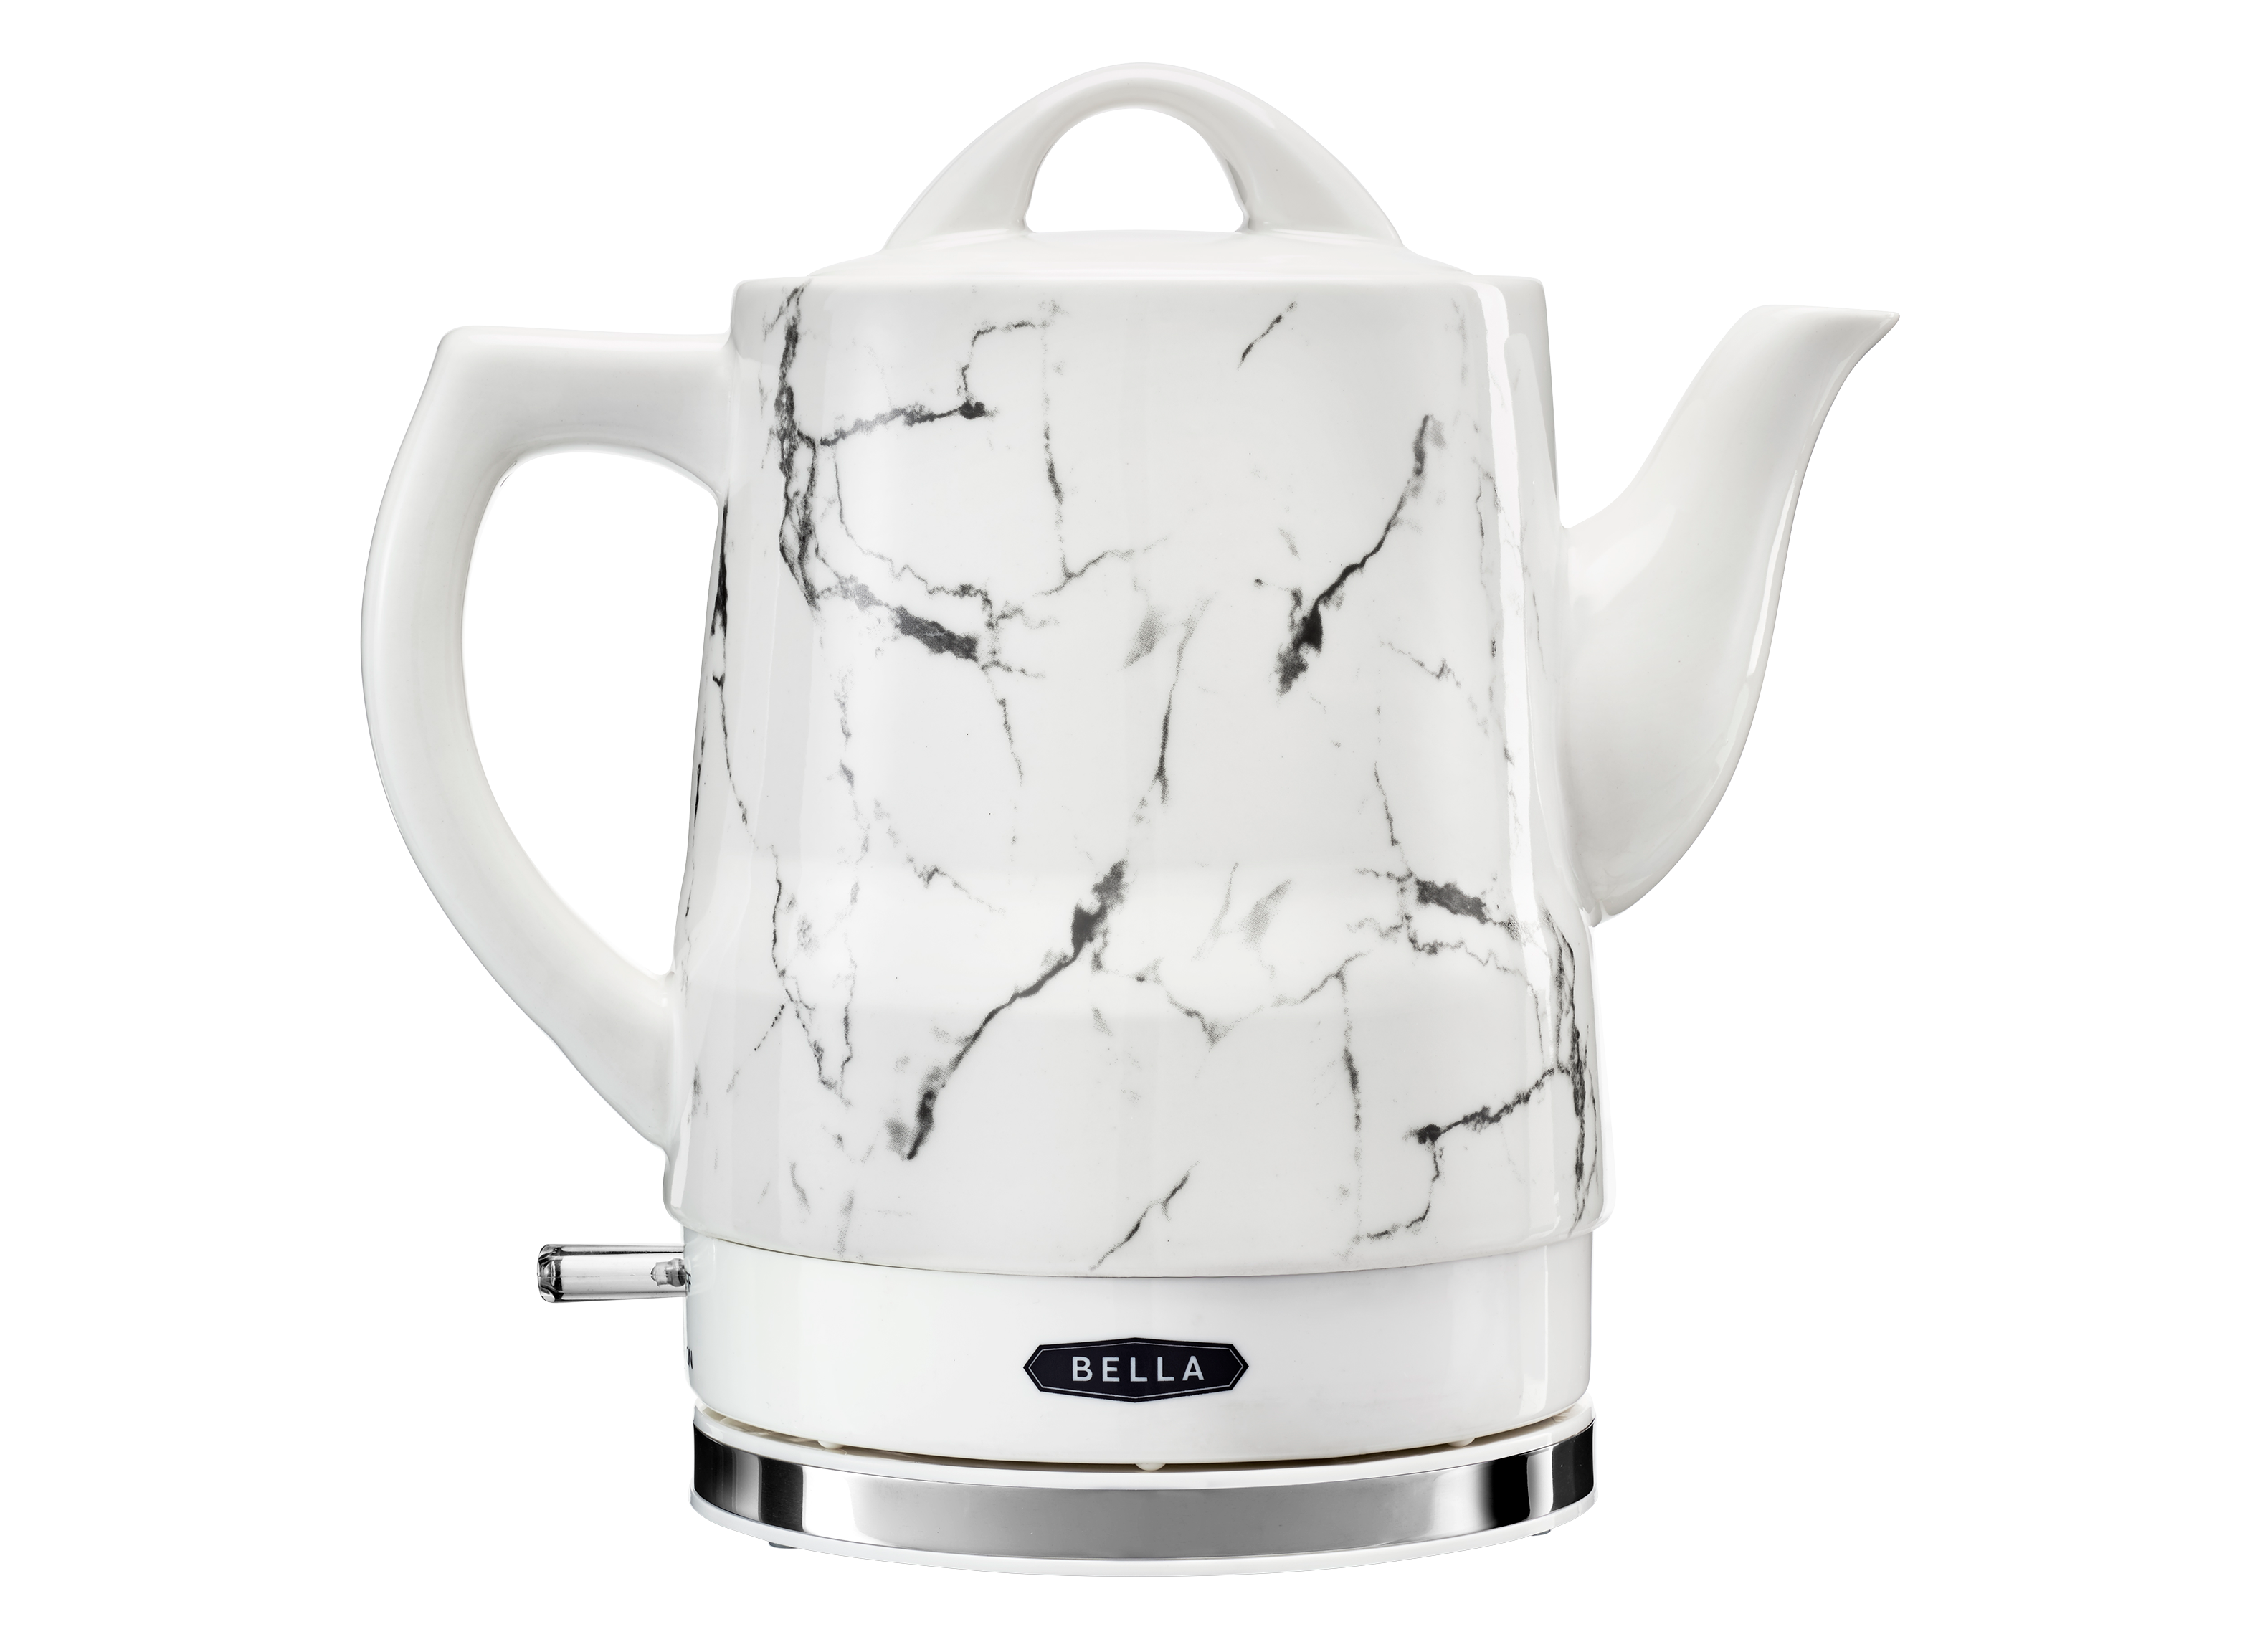 Bella Ceramic Electric Kettle Electric Kettle Review - Consumer